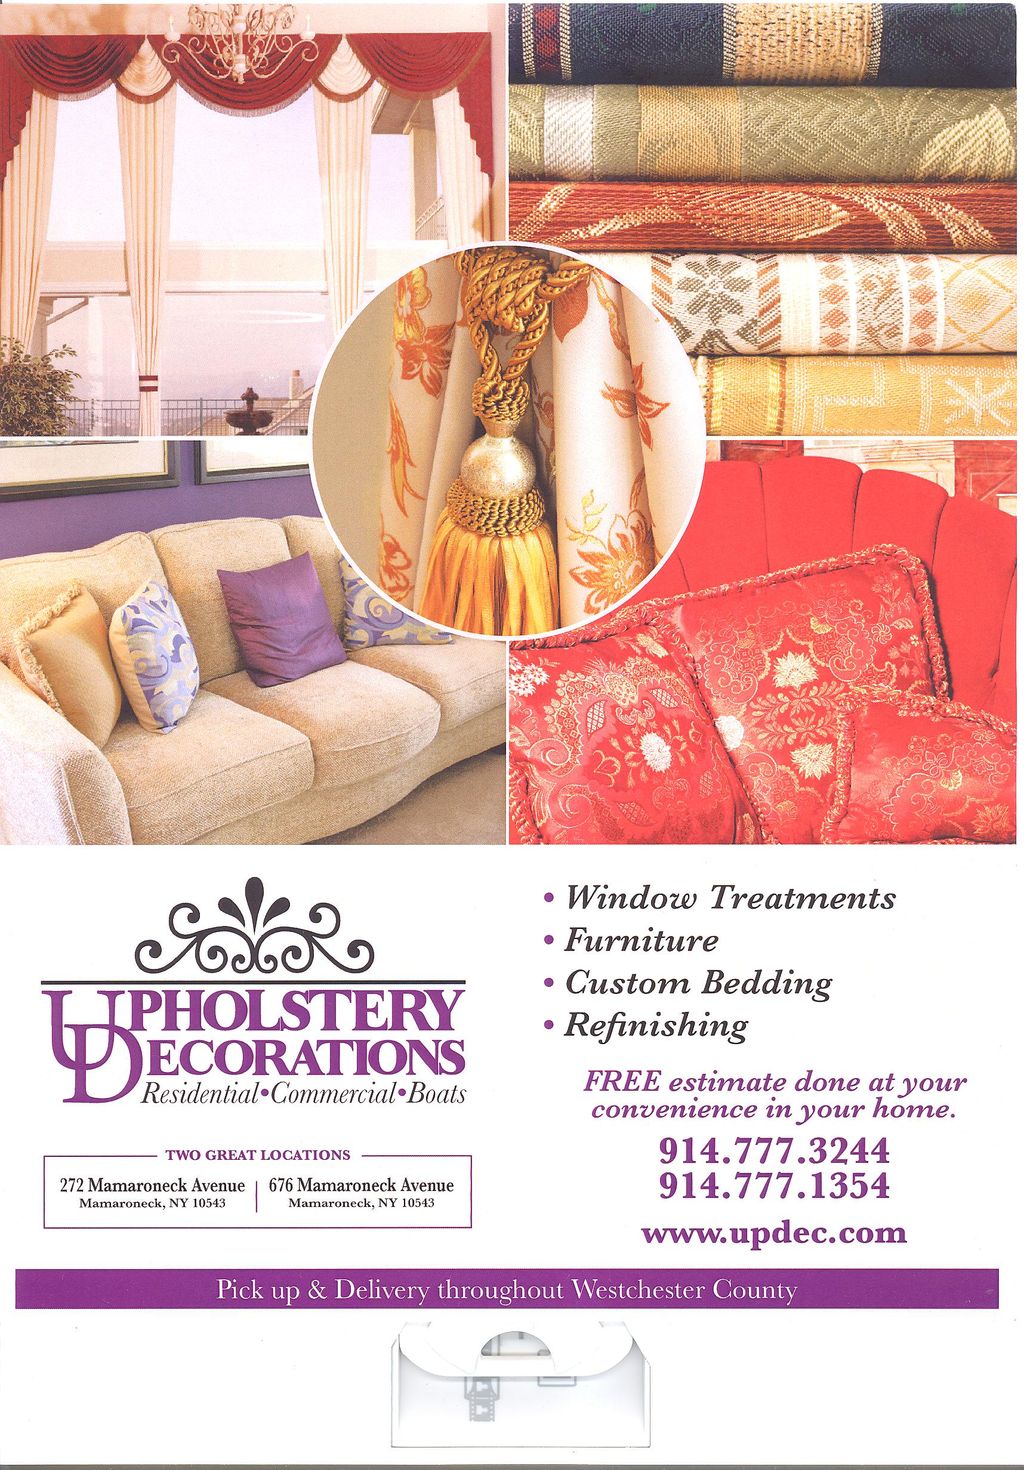 Upholstery Decorations